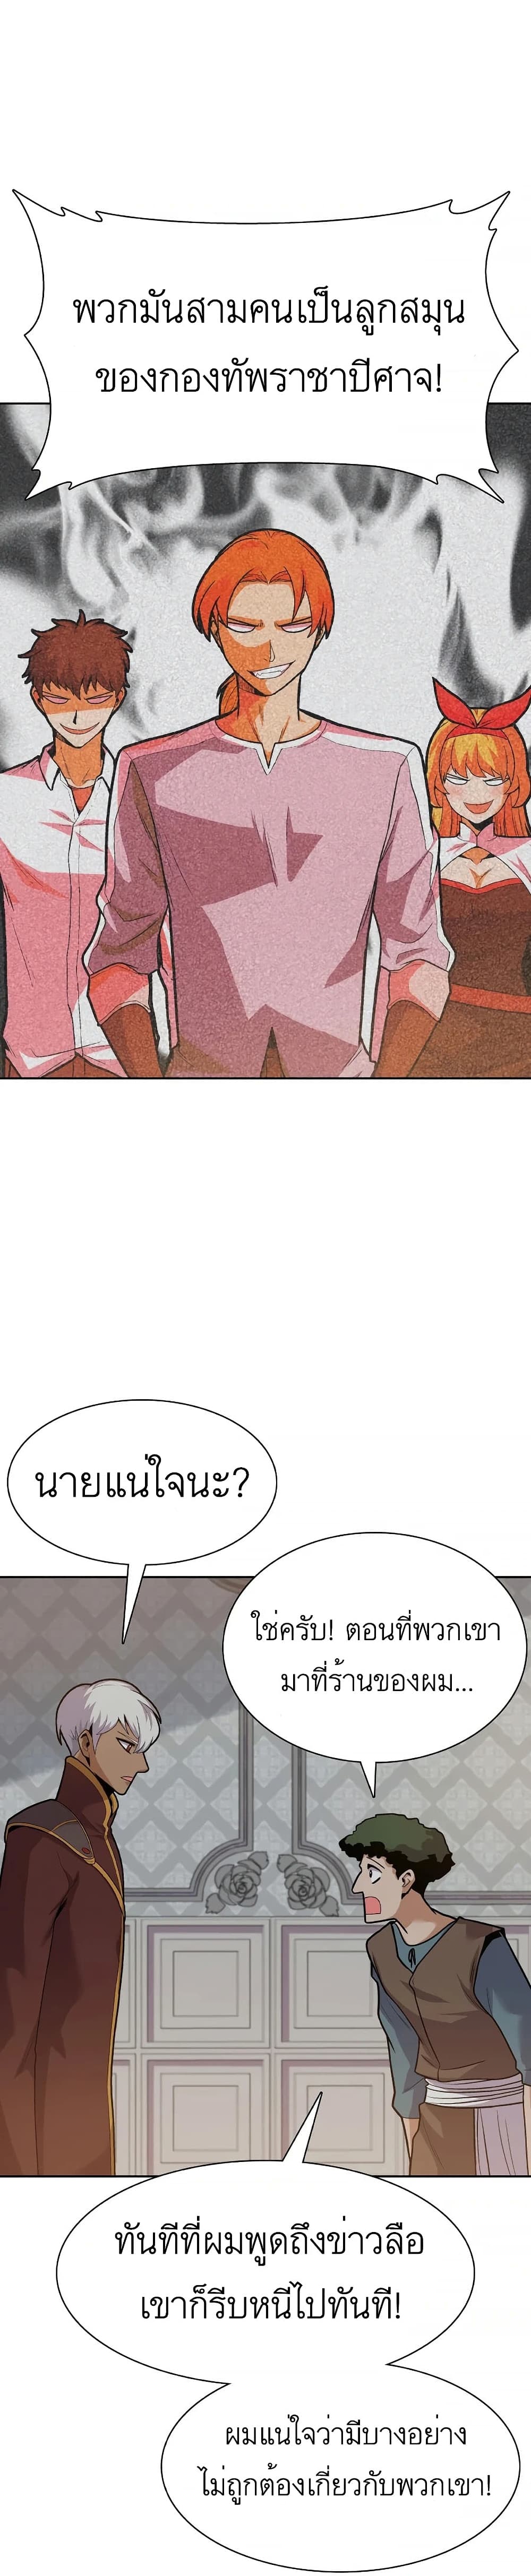 Raising Newbie Heroes In Another World ตอนที่ 14 (5)